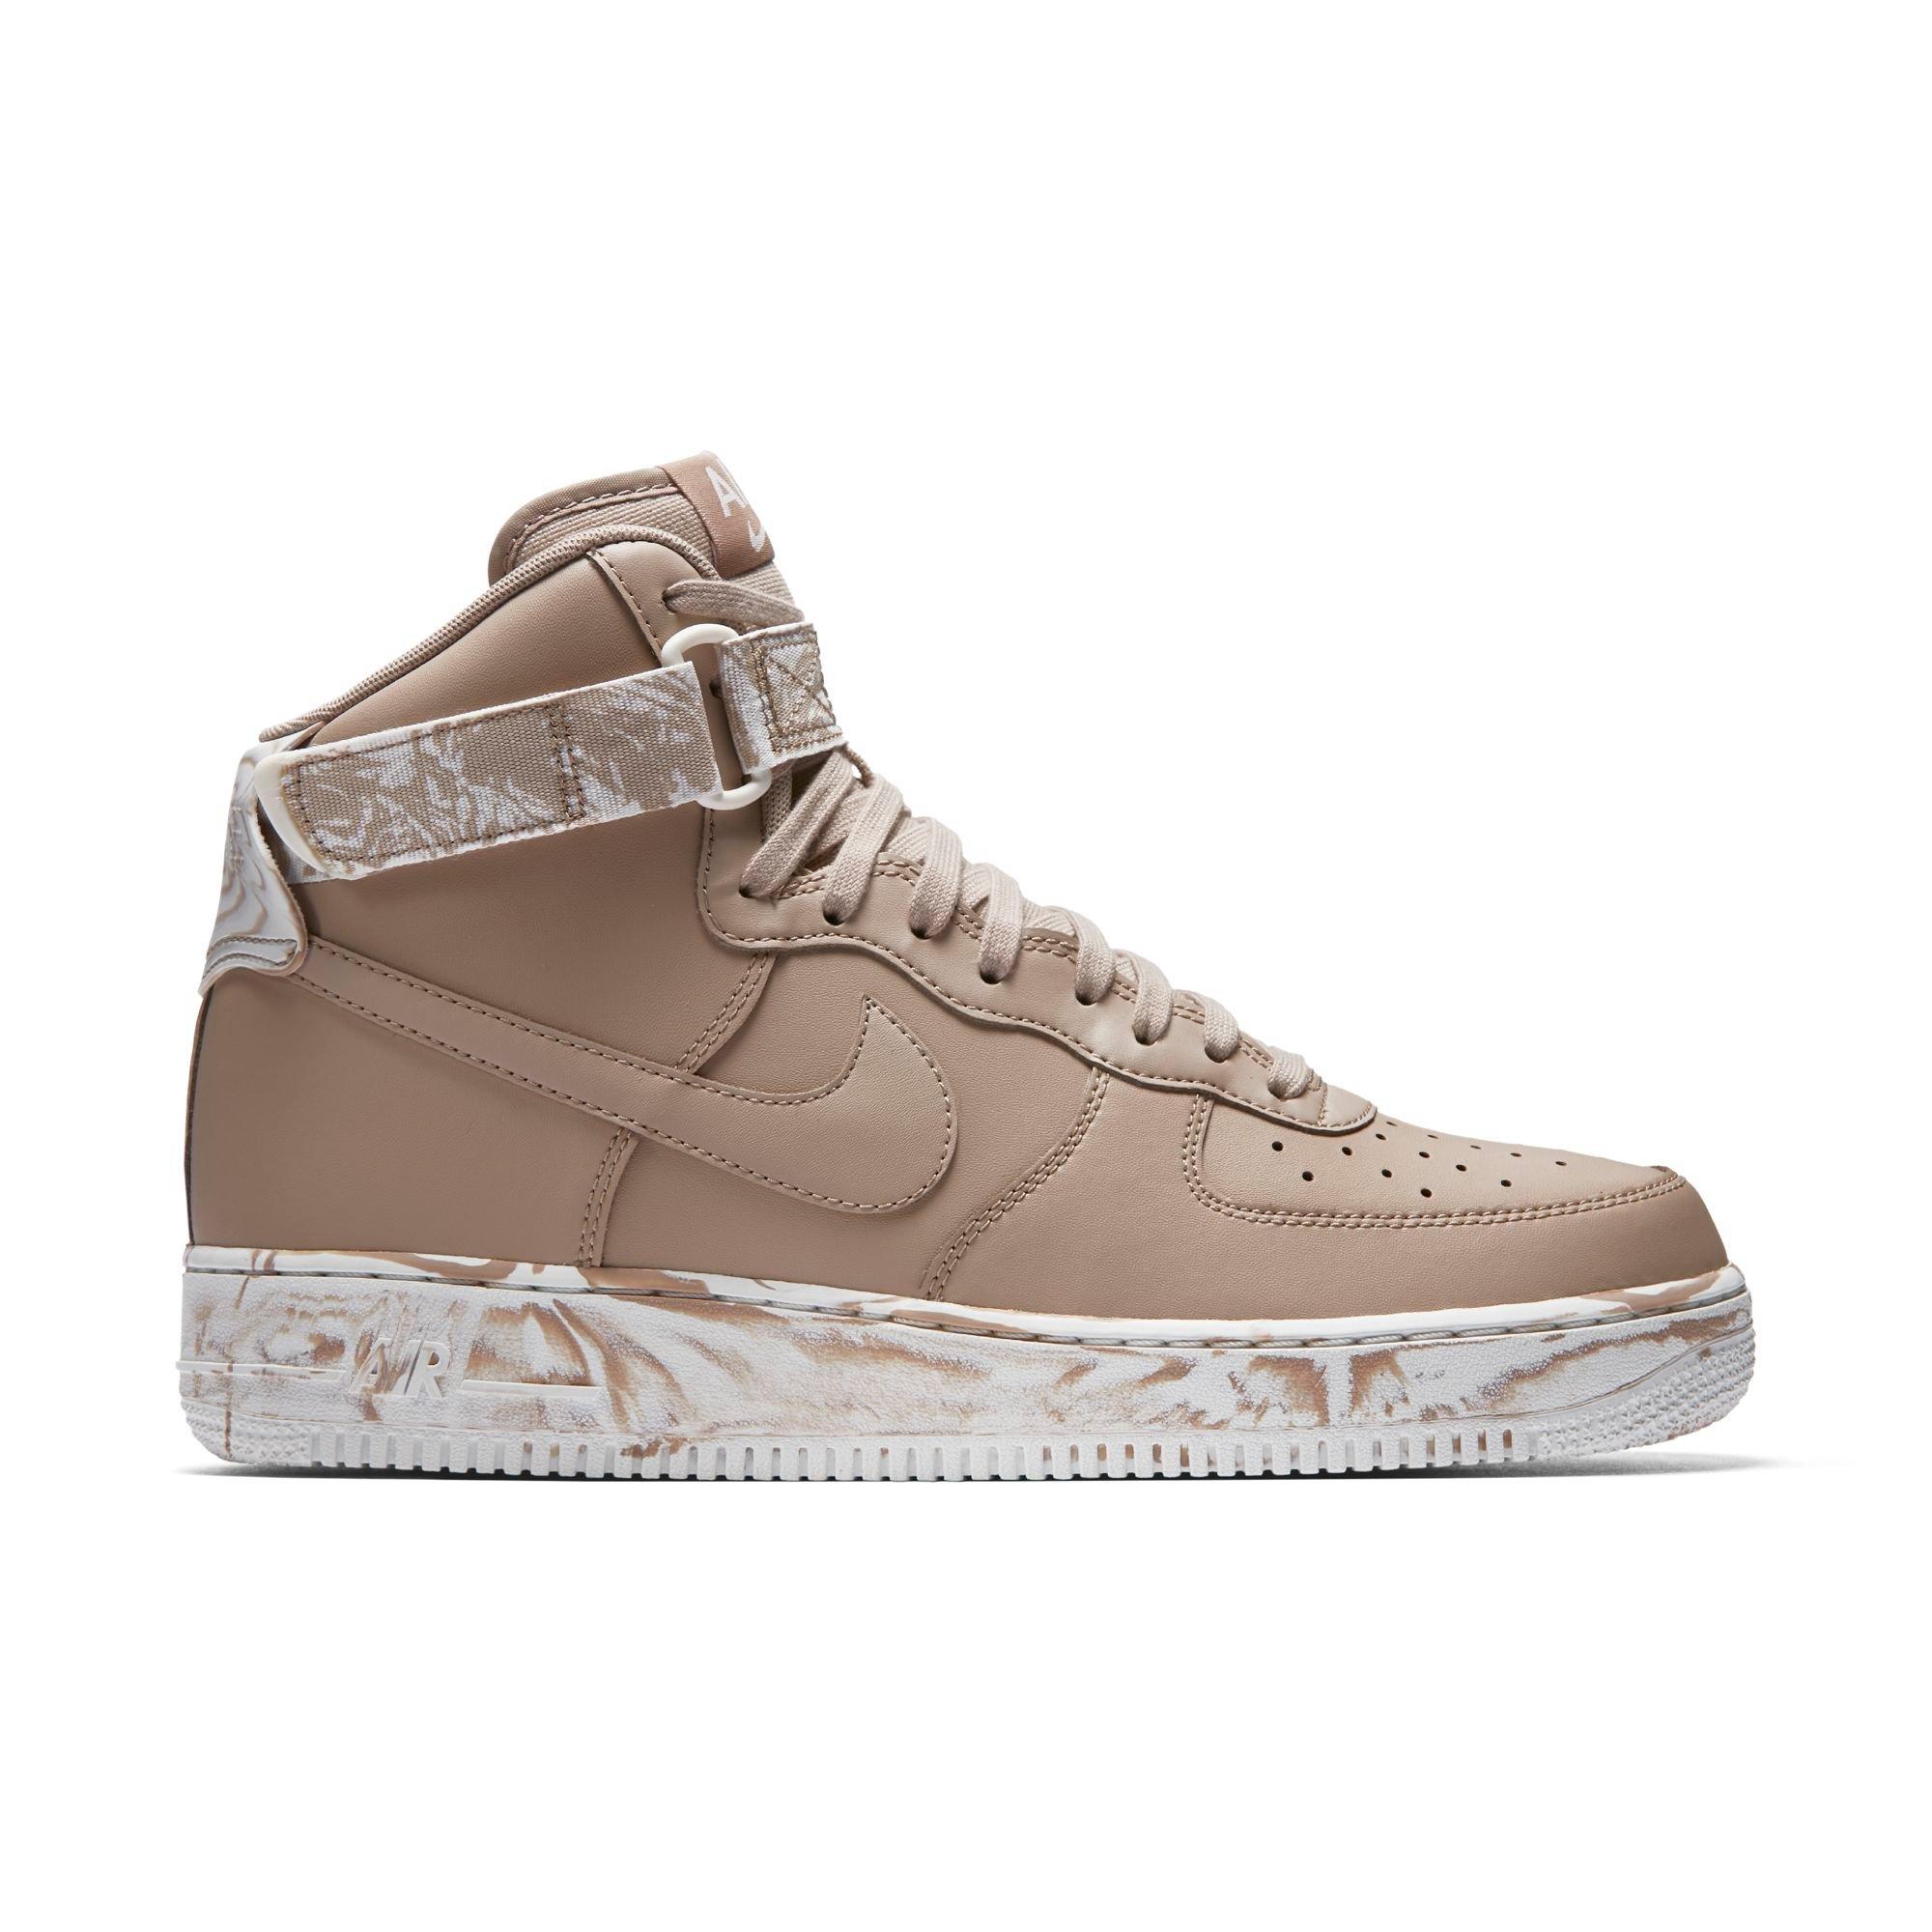 Nike Air Force 1 High '07 LV8 Leather 